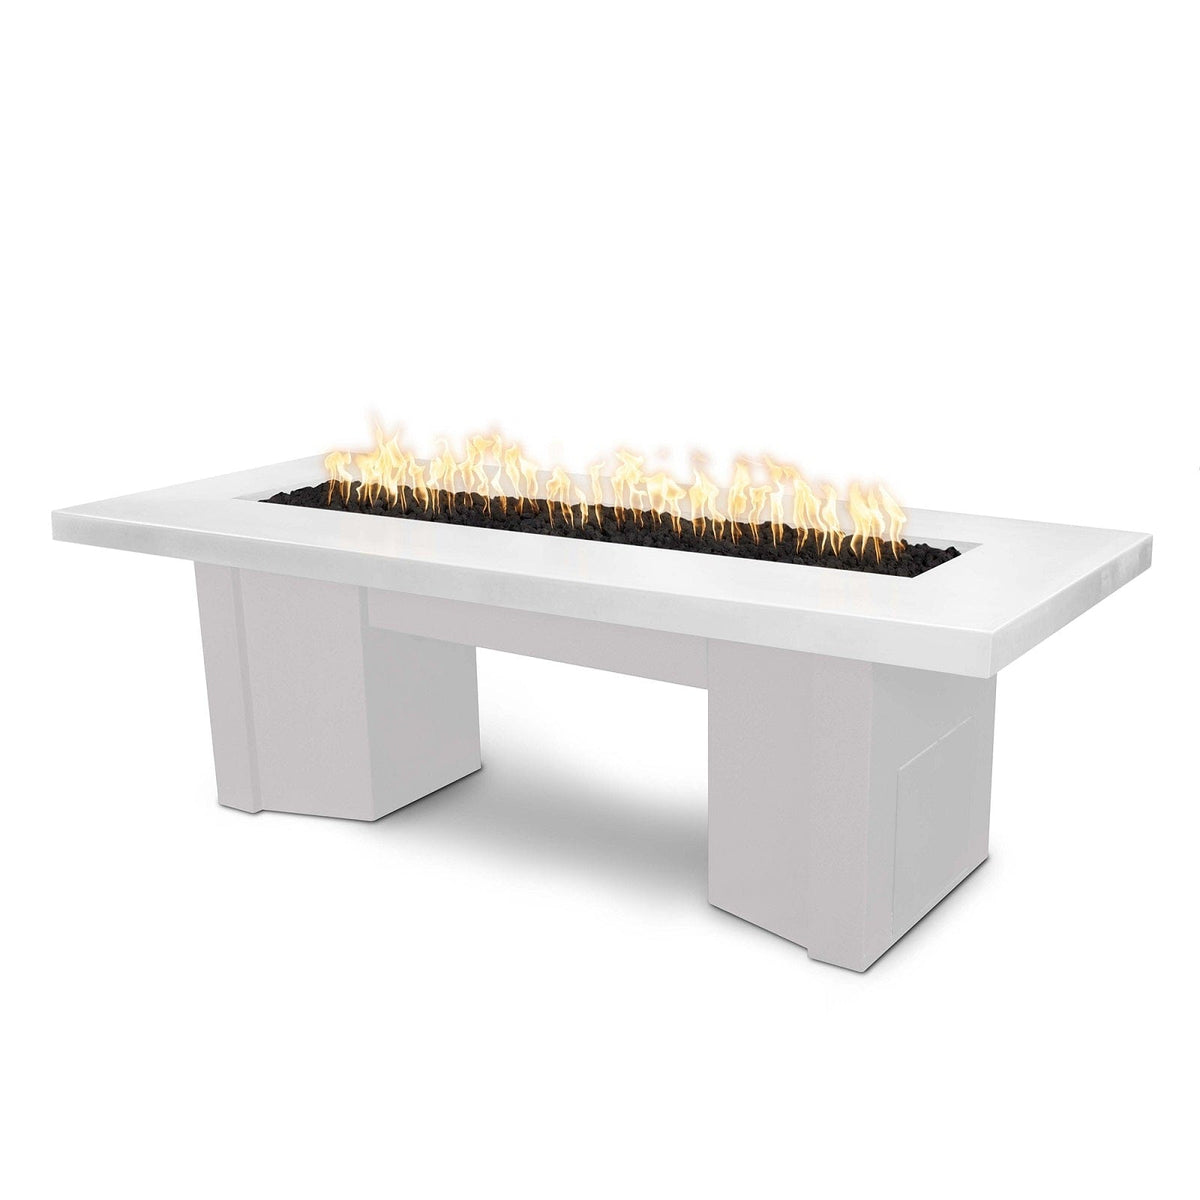 The Outdoor Plus Fire Features Limestone (-LIM) / White Powder Coated Steel (-WHT) The Outdoor Plus 60&quot; Alameda Fire Table Smooth Concrete in Natural Gas - Flame Sense System with Push Button Spark Igniter / OPT-ALMGFRC60FSEN-NG